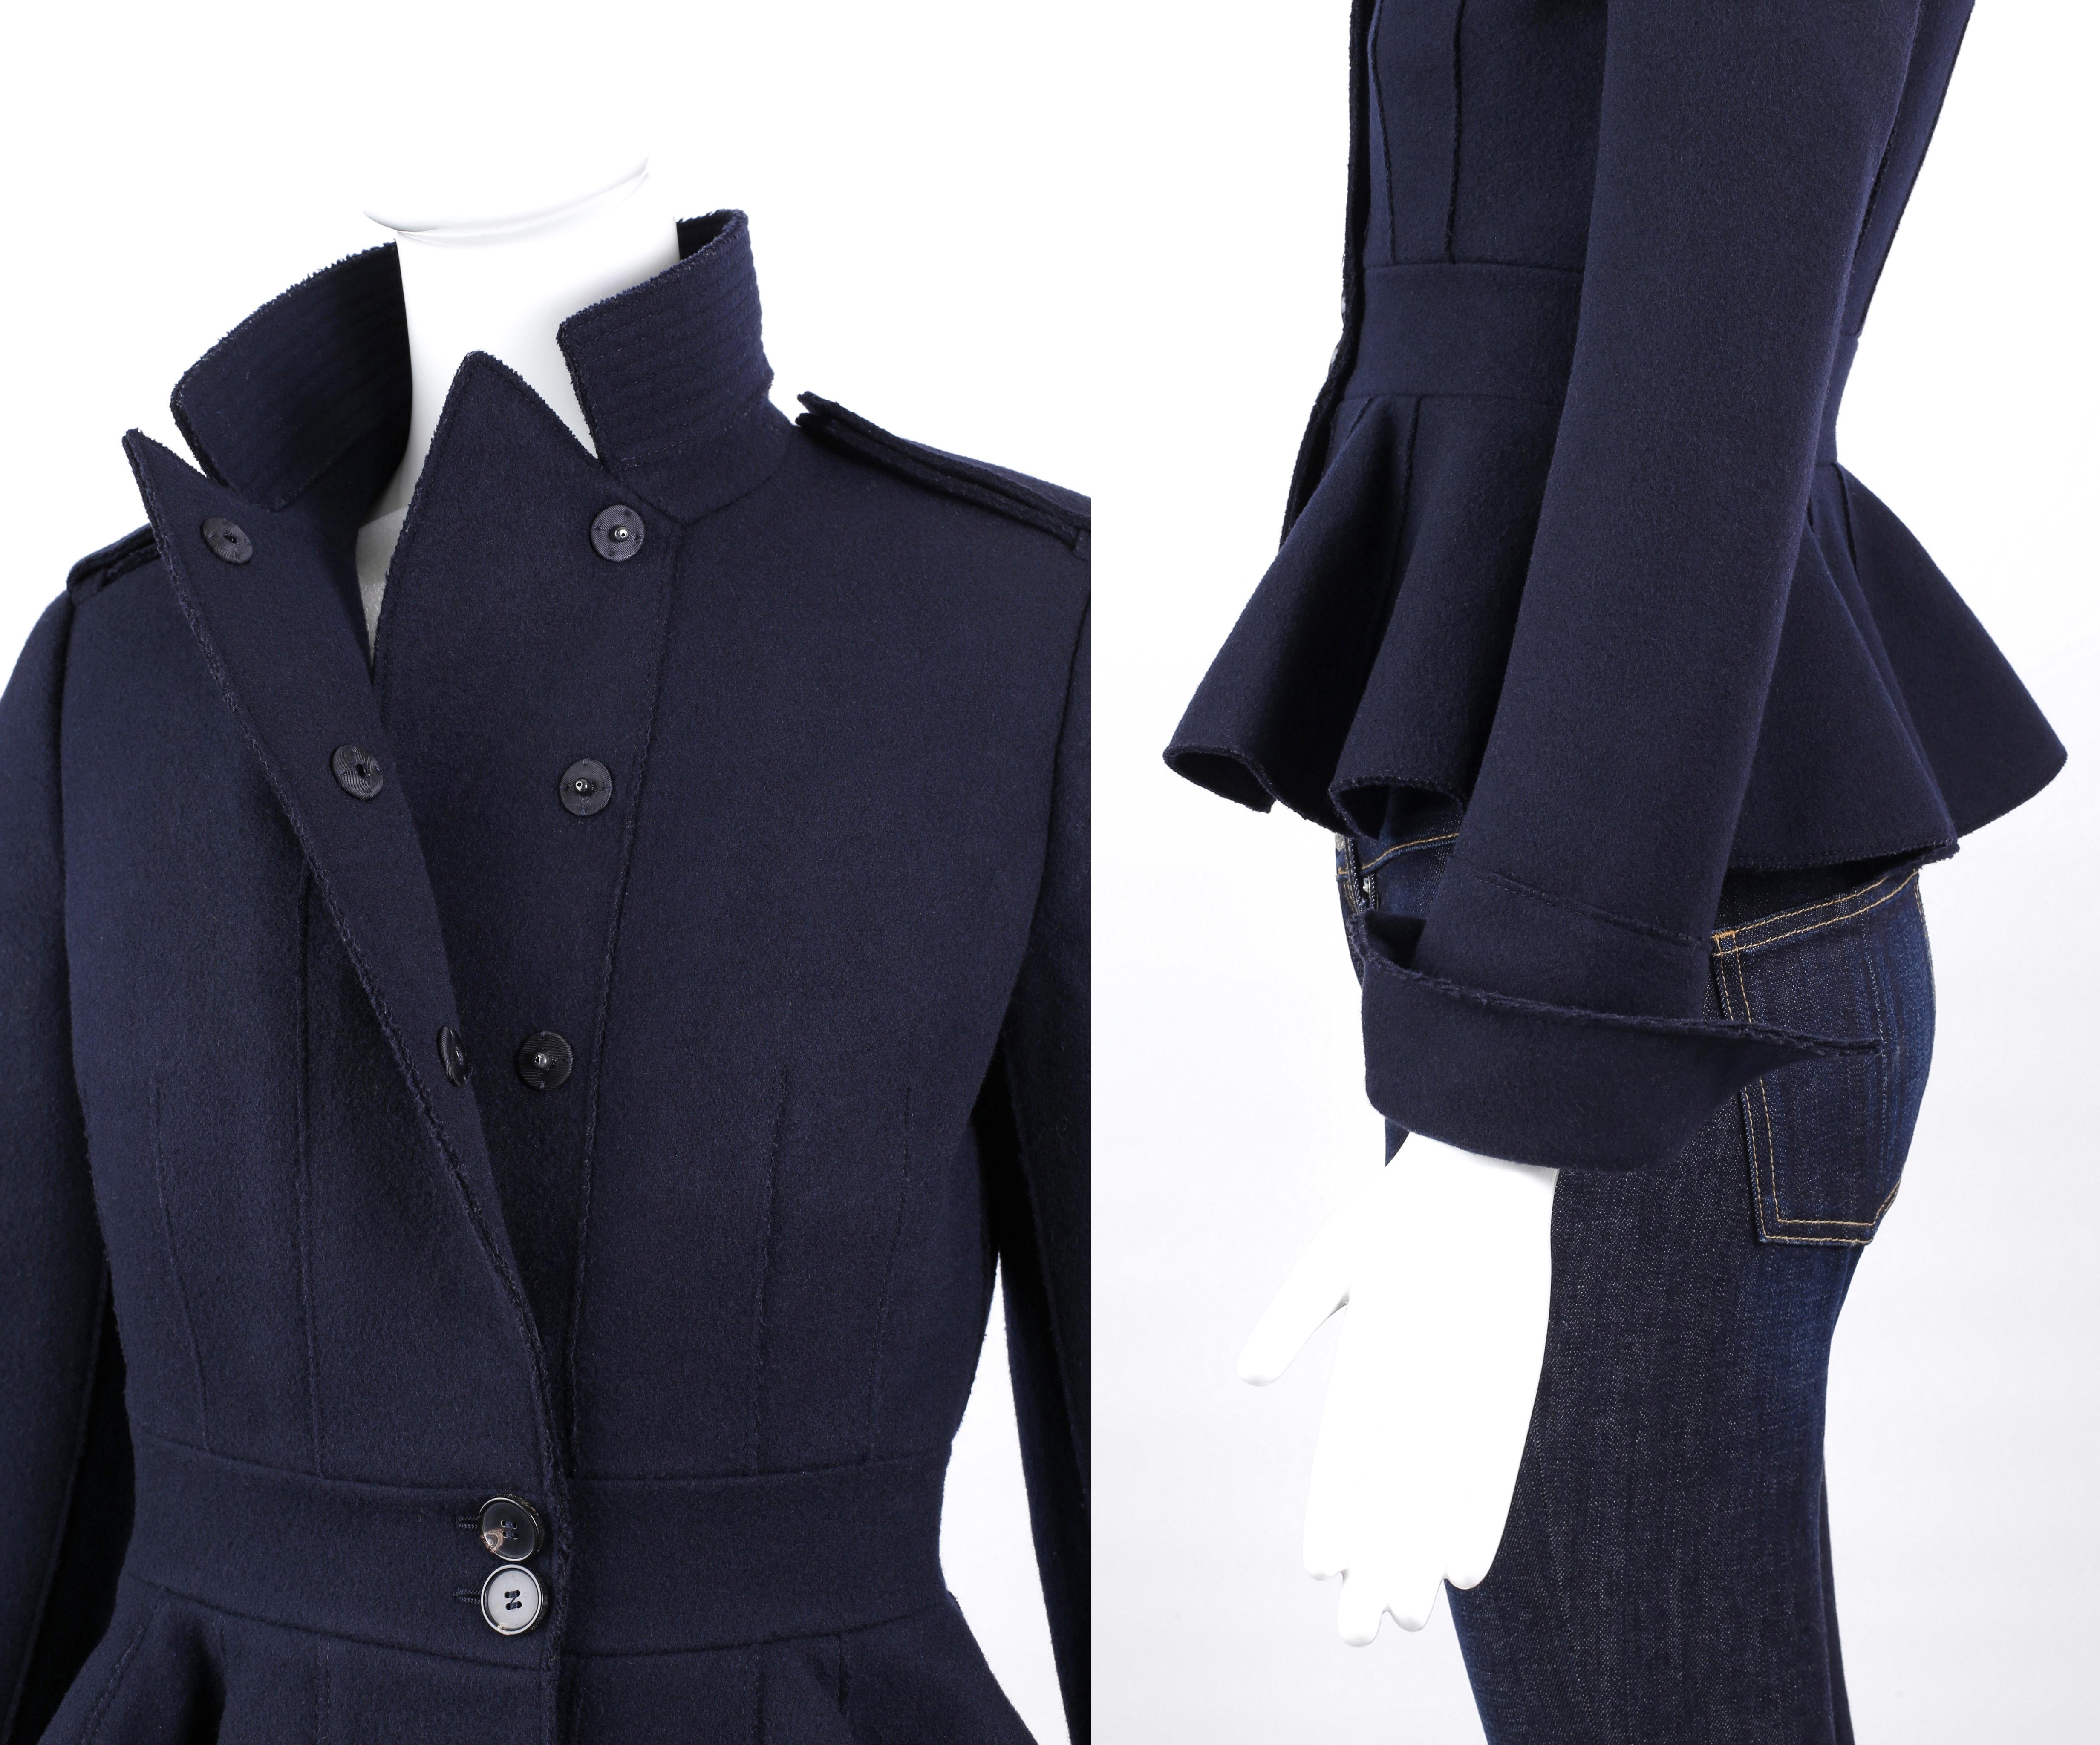 Alexander McQueen Pre-Fall 2015 Navy Wool Peplum Military Style Blazer Jacket In Good Condition For Sale In Chicago, IL